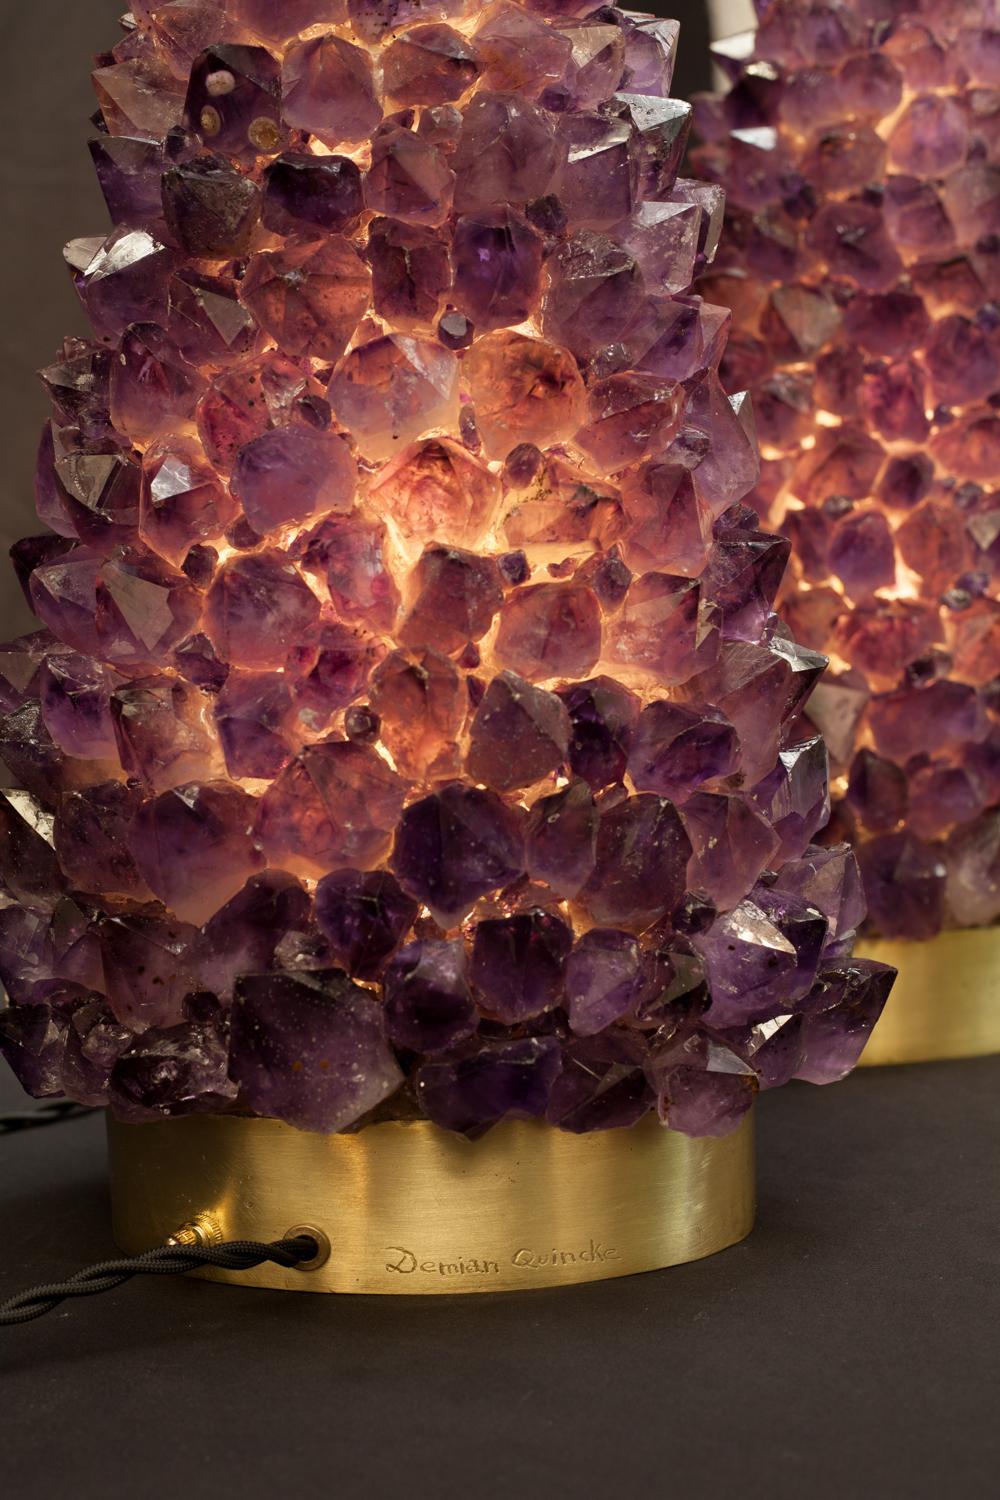 Brazilian Pair of Natural Amethyst Table Lamps, Signed by Demian Quincke